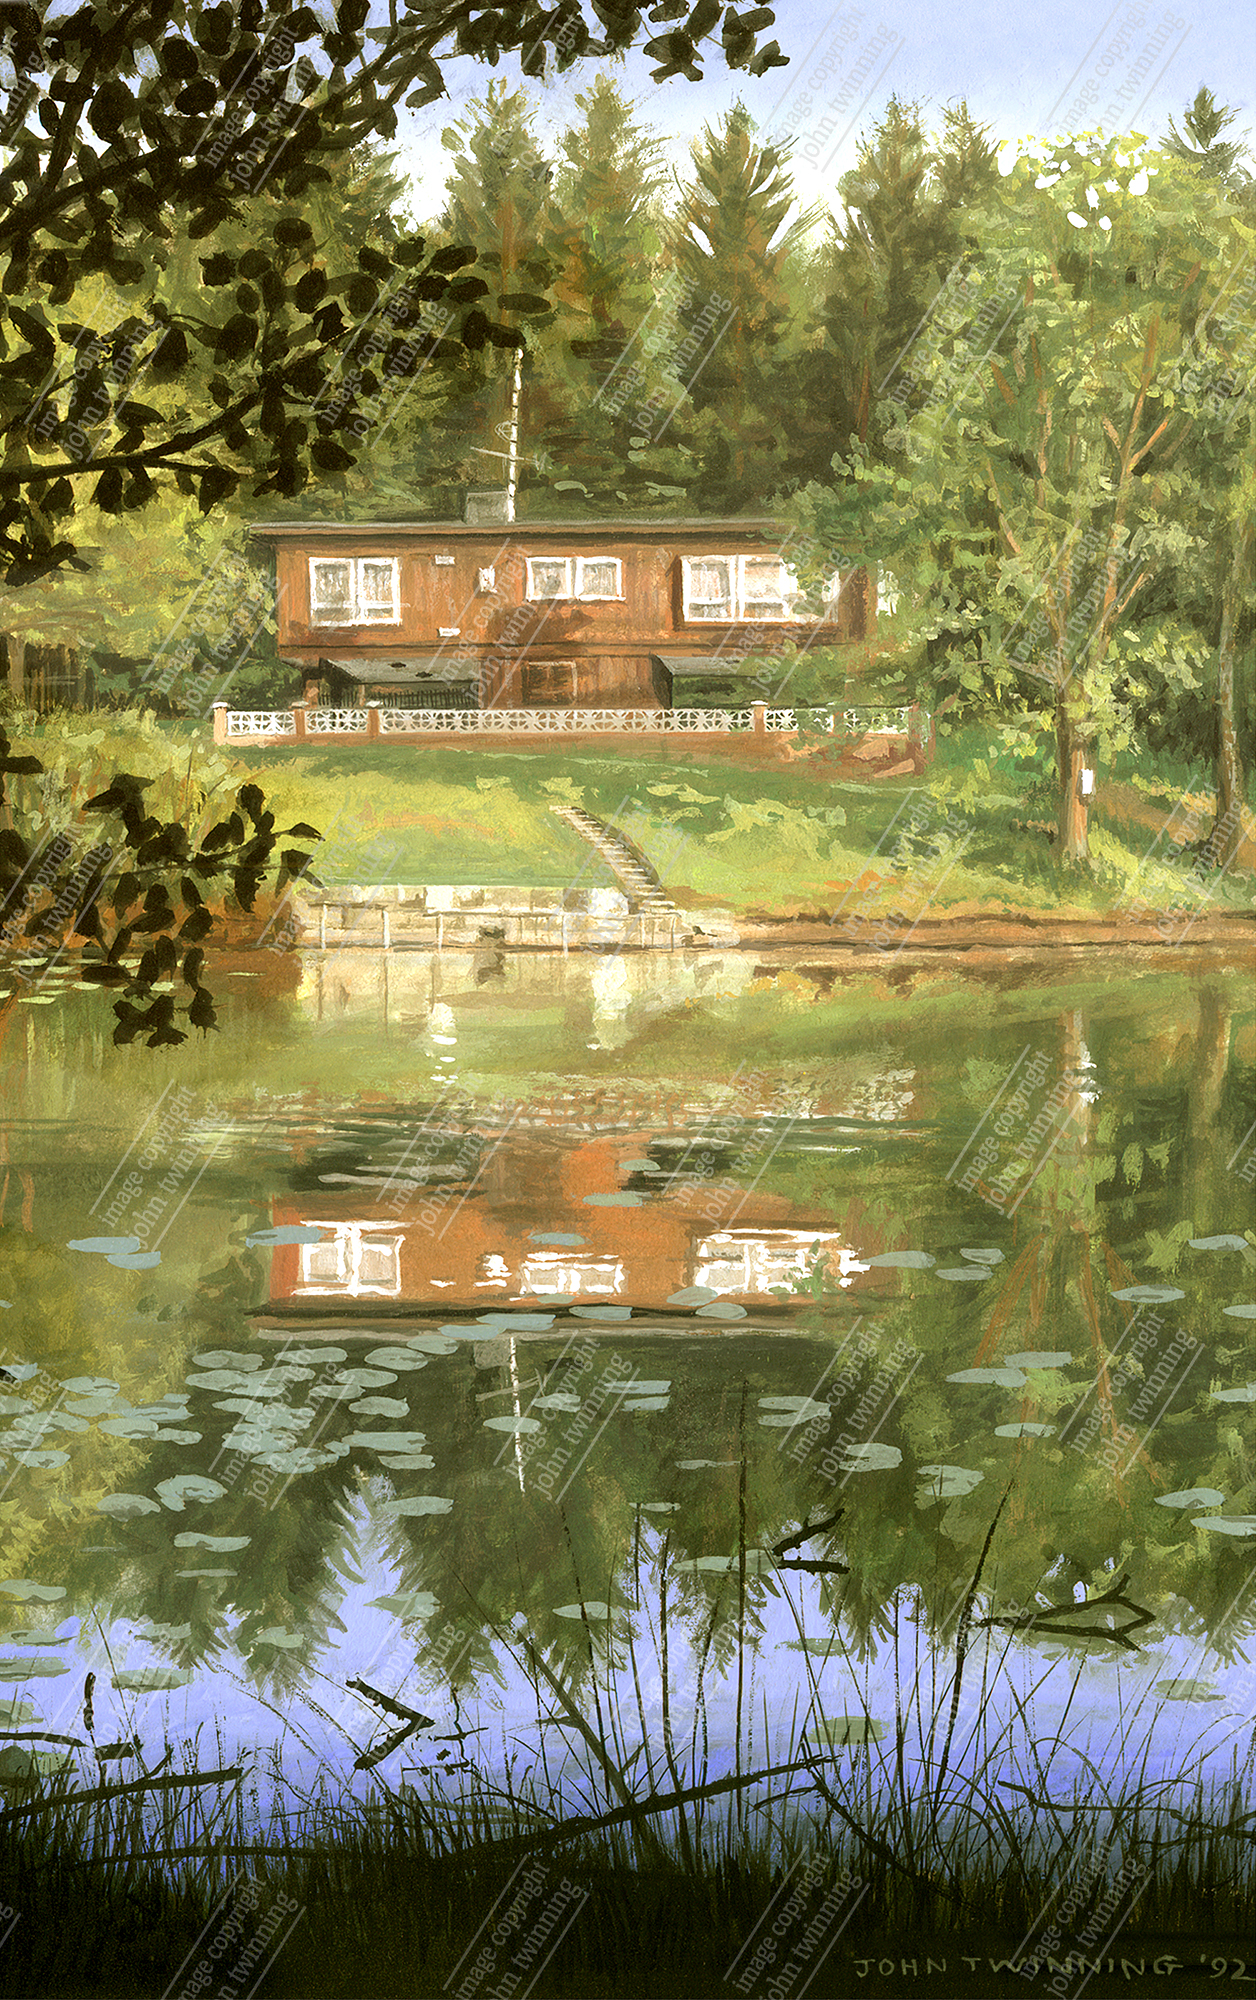 ‘Trout Lodge, Cannock Chase’ – art print from a watercolour painting of this rural scene reflected in a tranquil pool